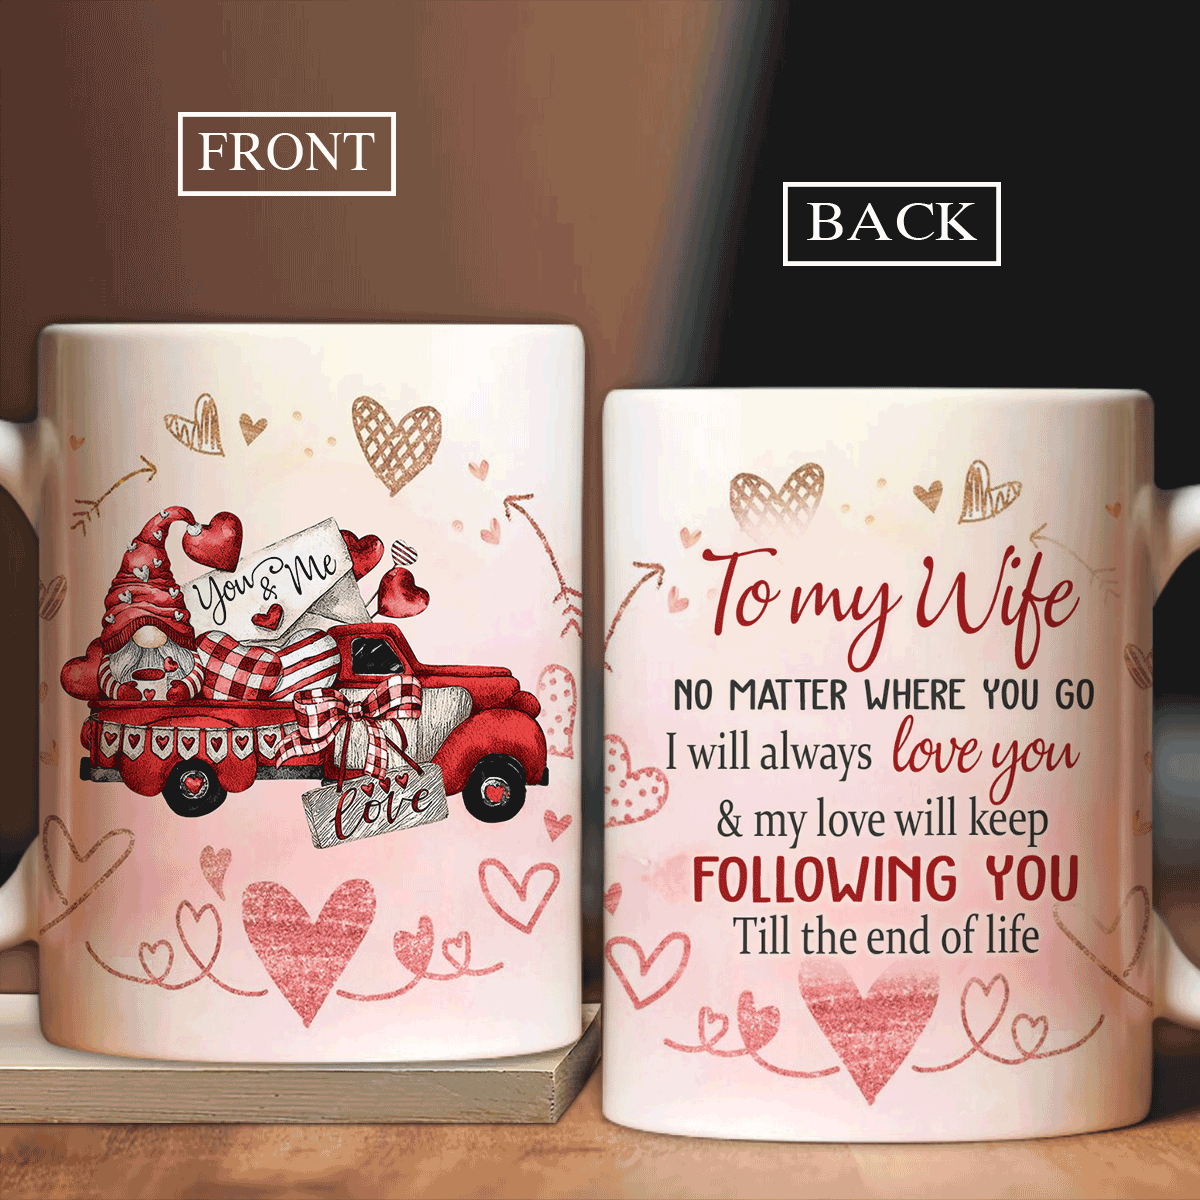 Couple AOP Mug - To my wife, Red truck, Gnome, Pink heart Mug - Gift for Couple, lover- My love will keep following you till the end of life Mug